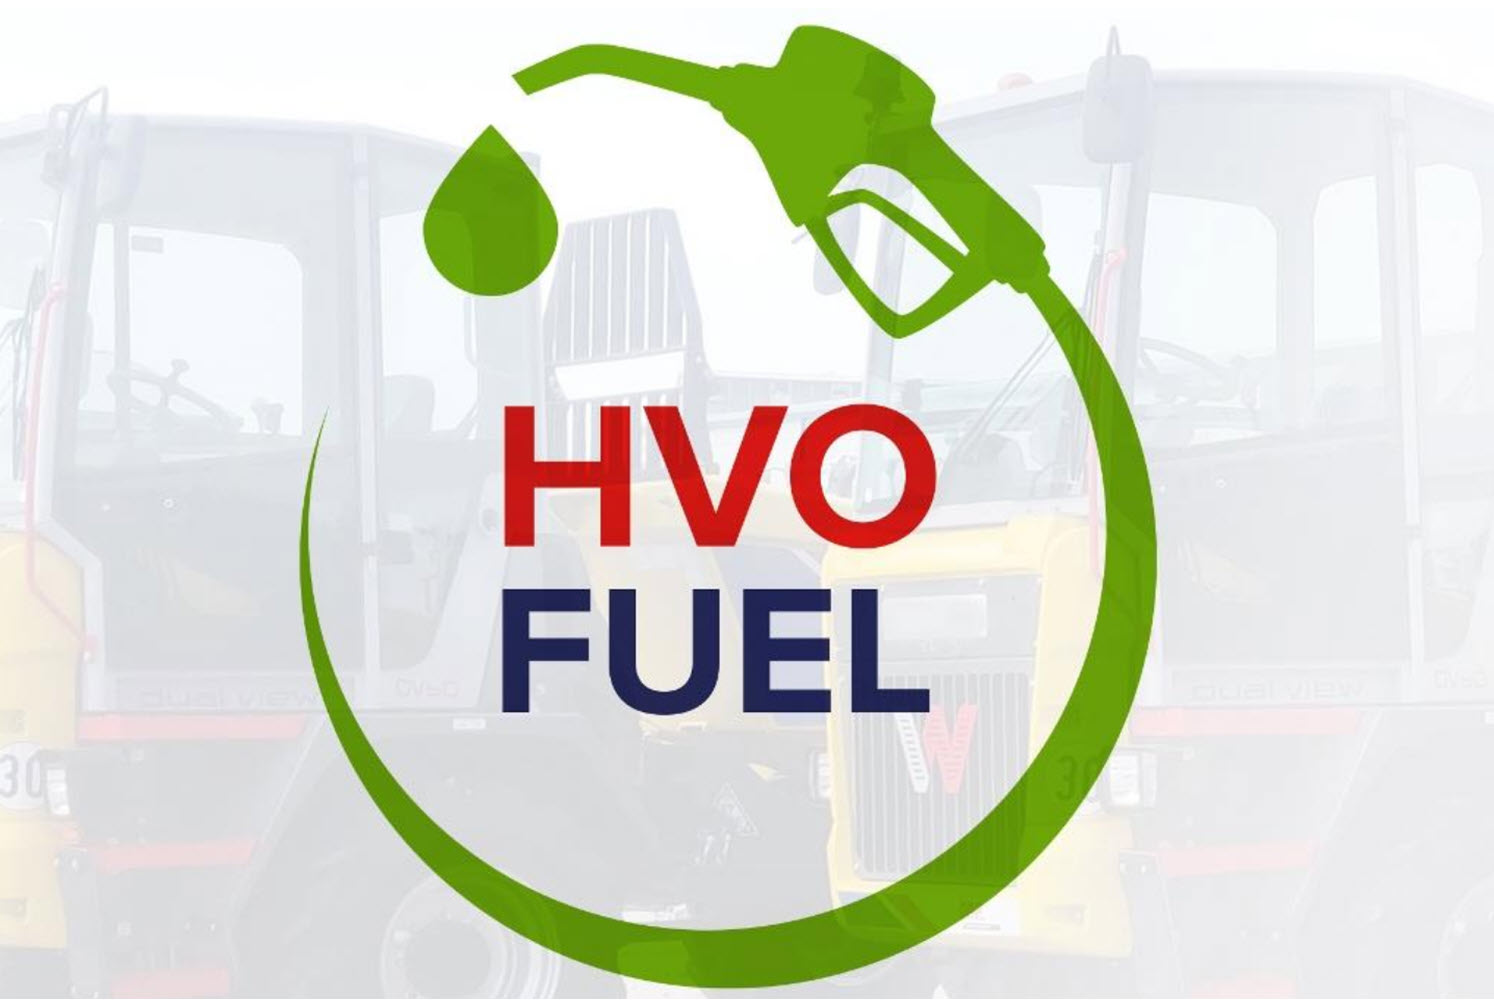 Hydrotreated Vegetable Oil or referred to as HVO fuel